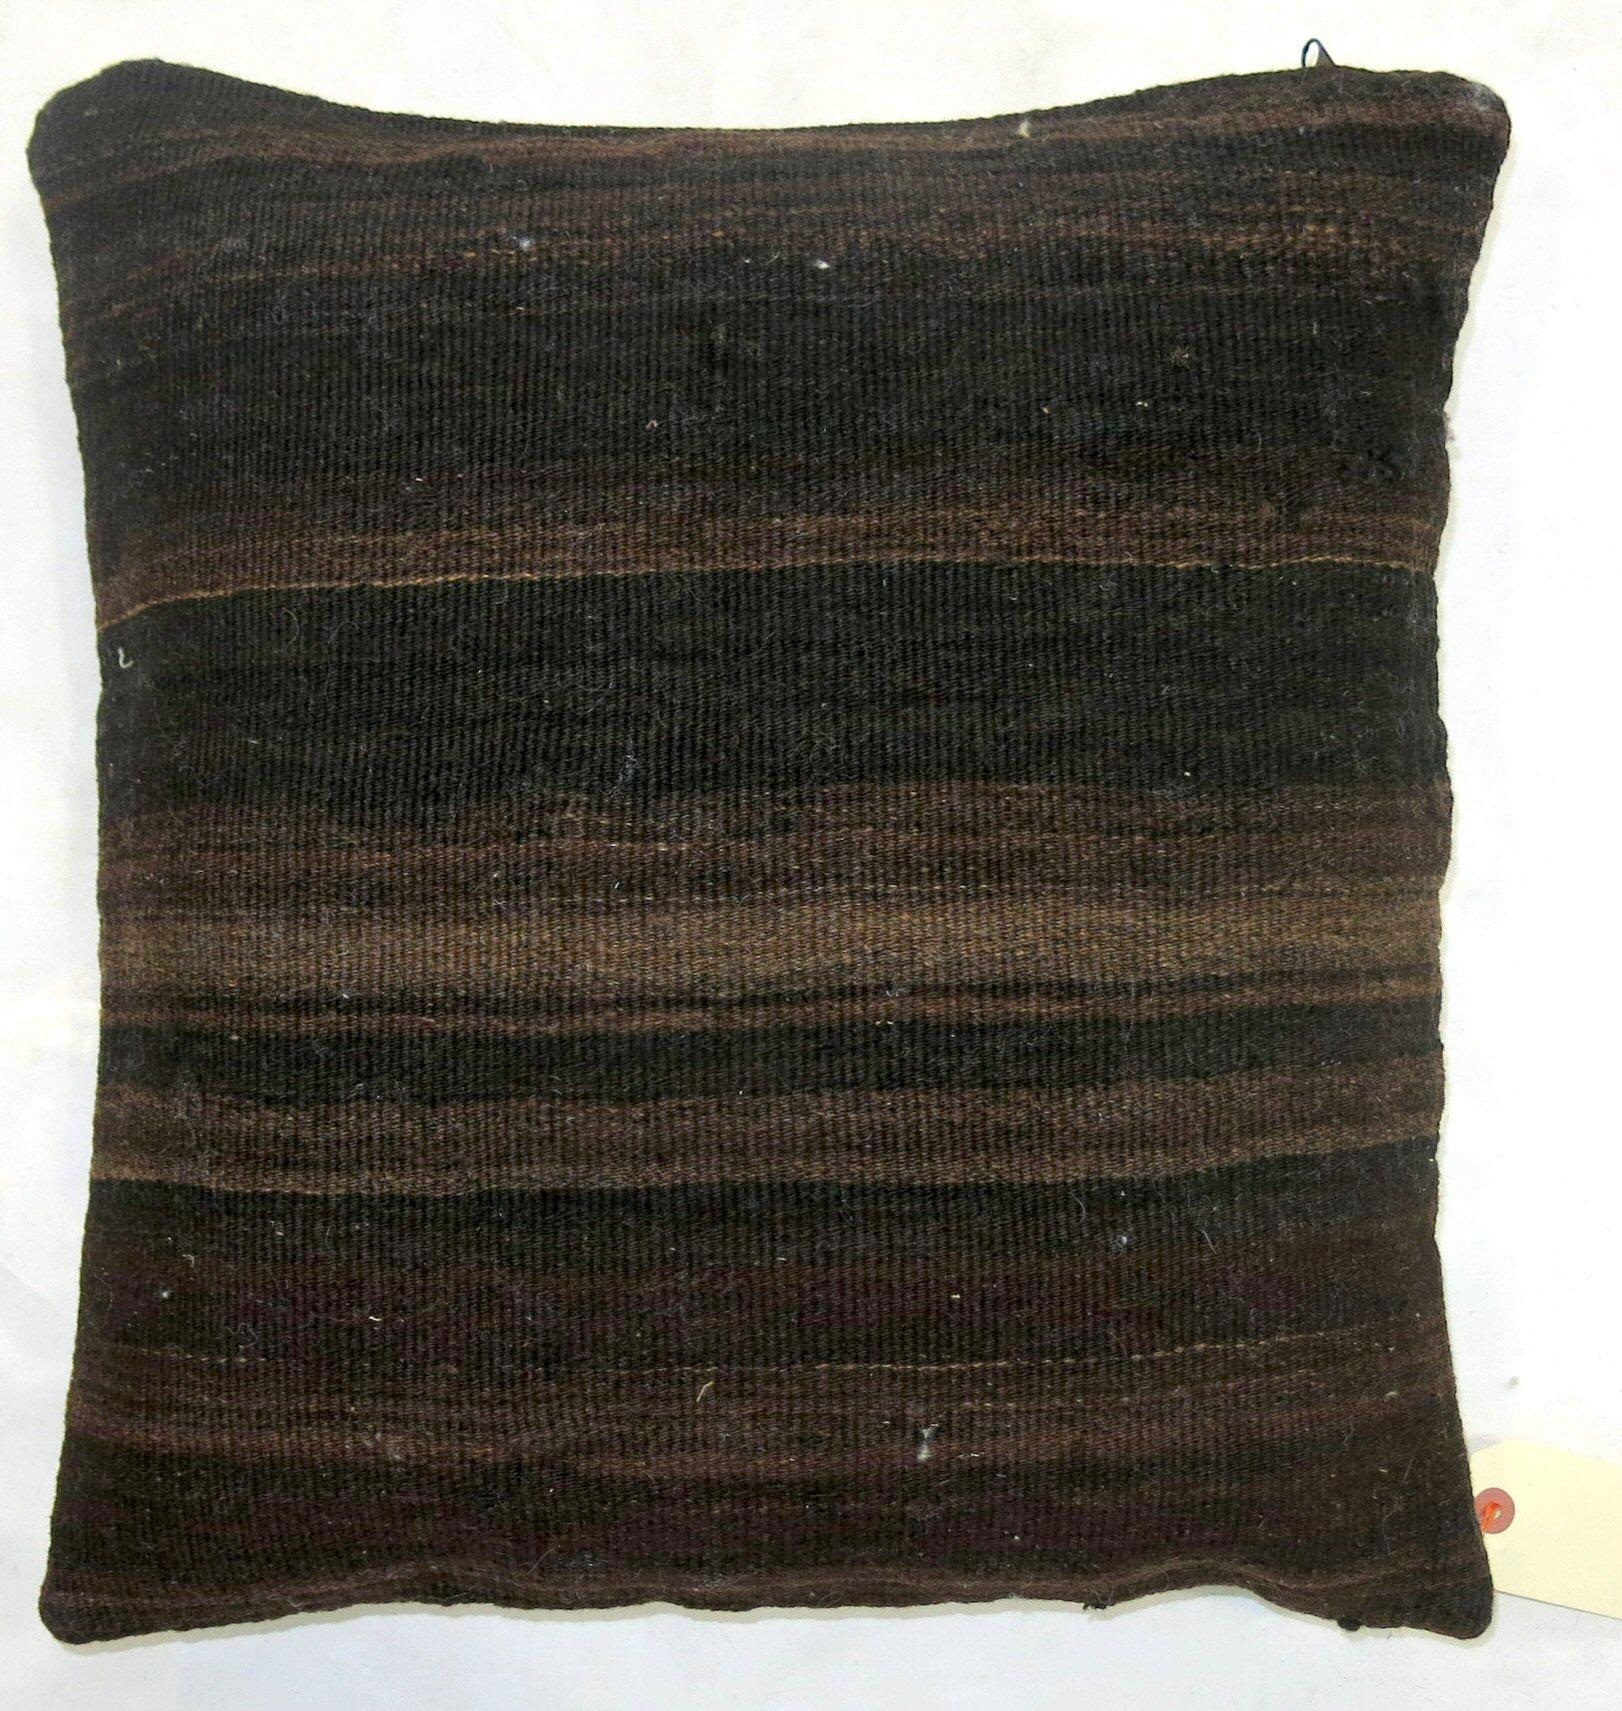 Square-size double sided pillow made from a vintage Turkish Kilim flat-weave.

Measures: 18'' x 19''.